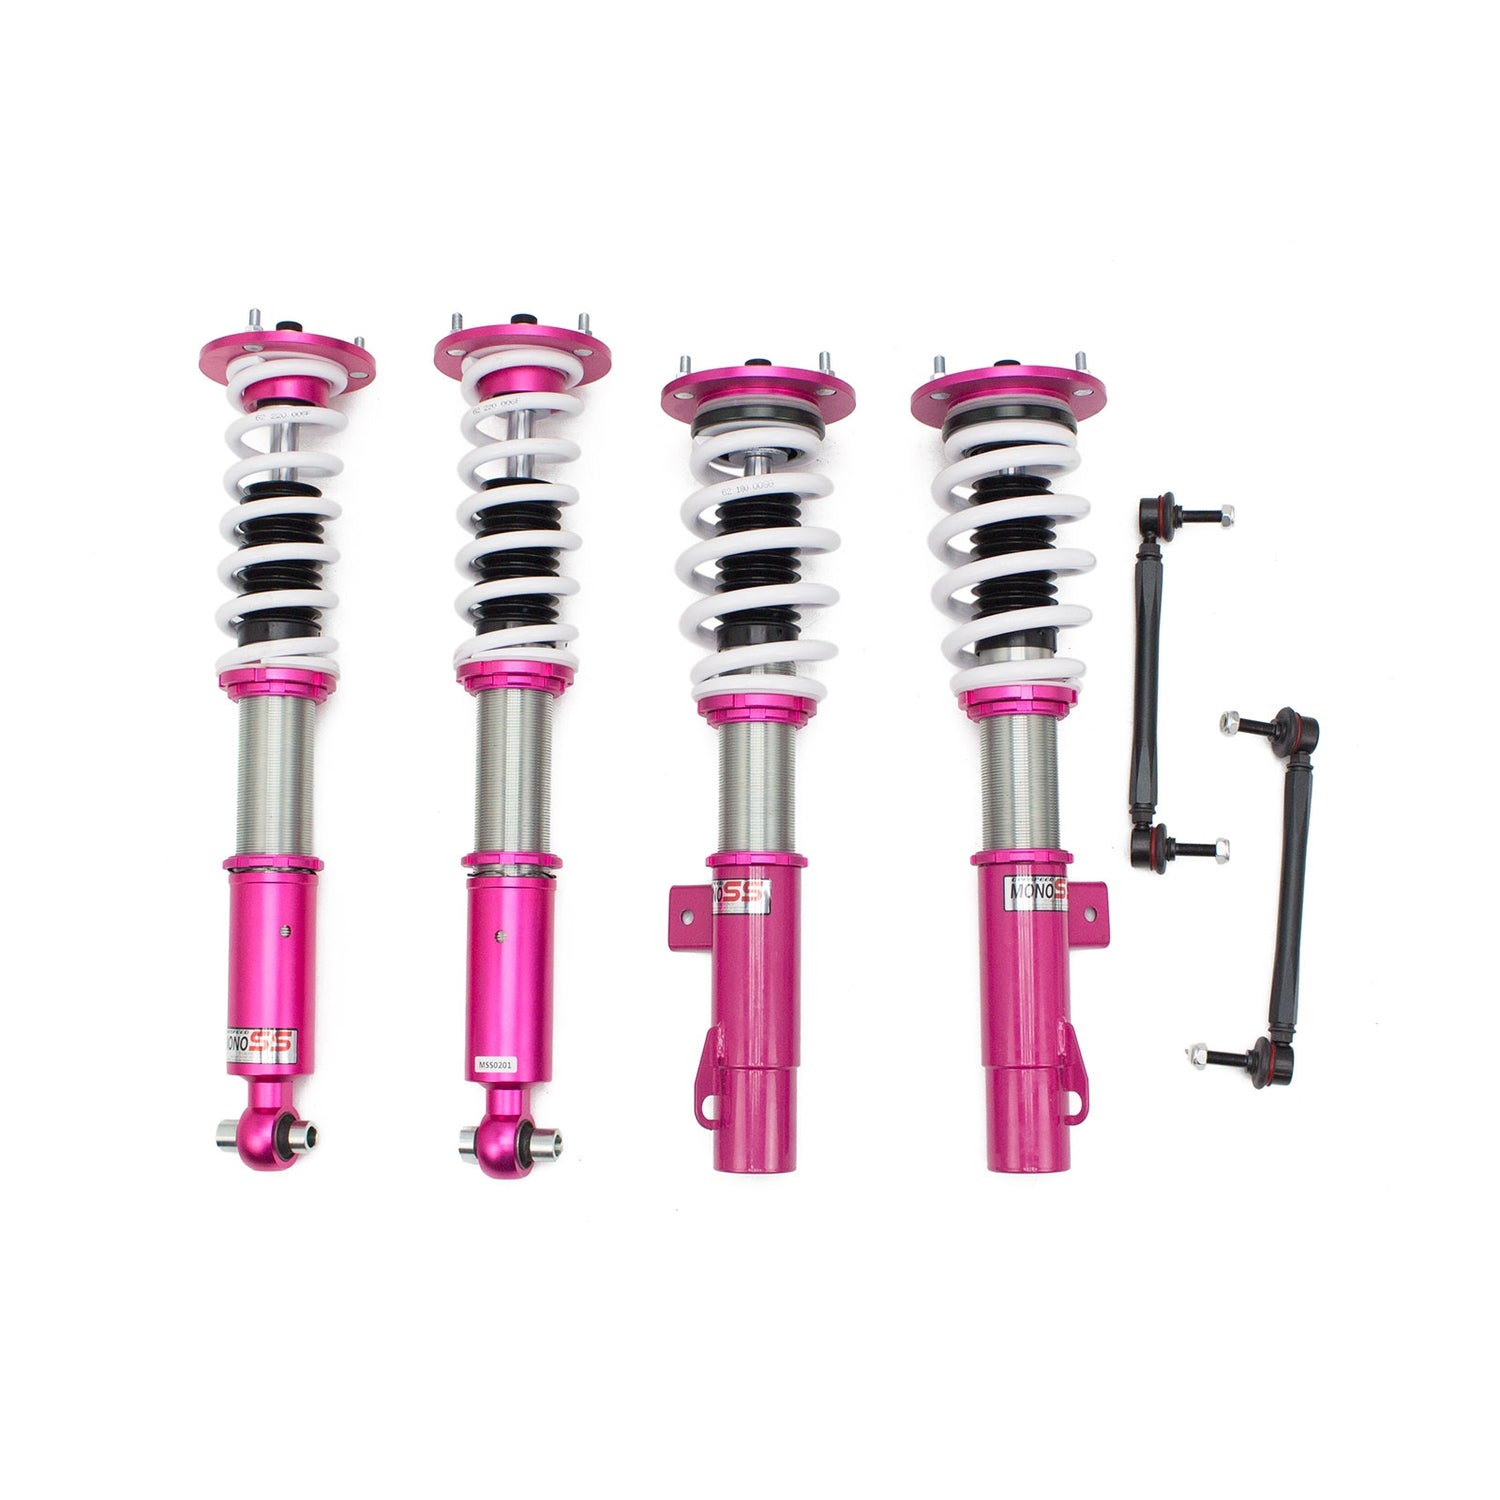 Godspeed(MSS0201) MonoSS Coilover Lowering Kit, Fully Adjustable, Ride Height, Spring Tension And 16 Click Damping, BMW 7-Series(E38) 1994-01